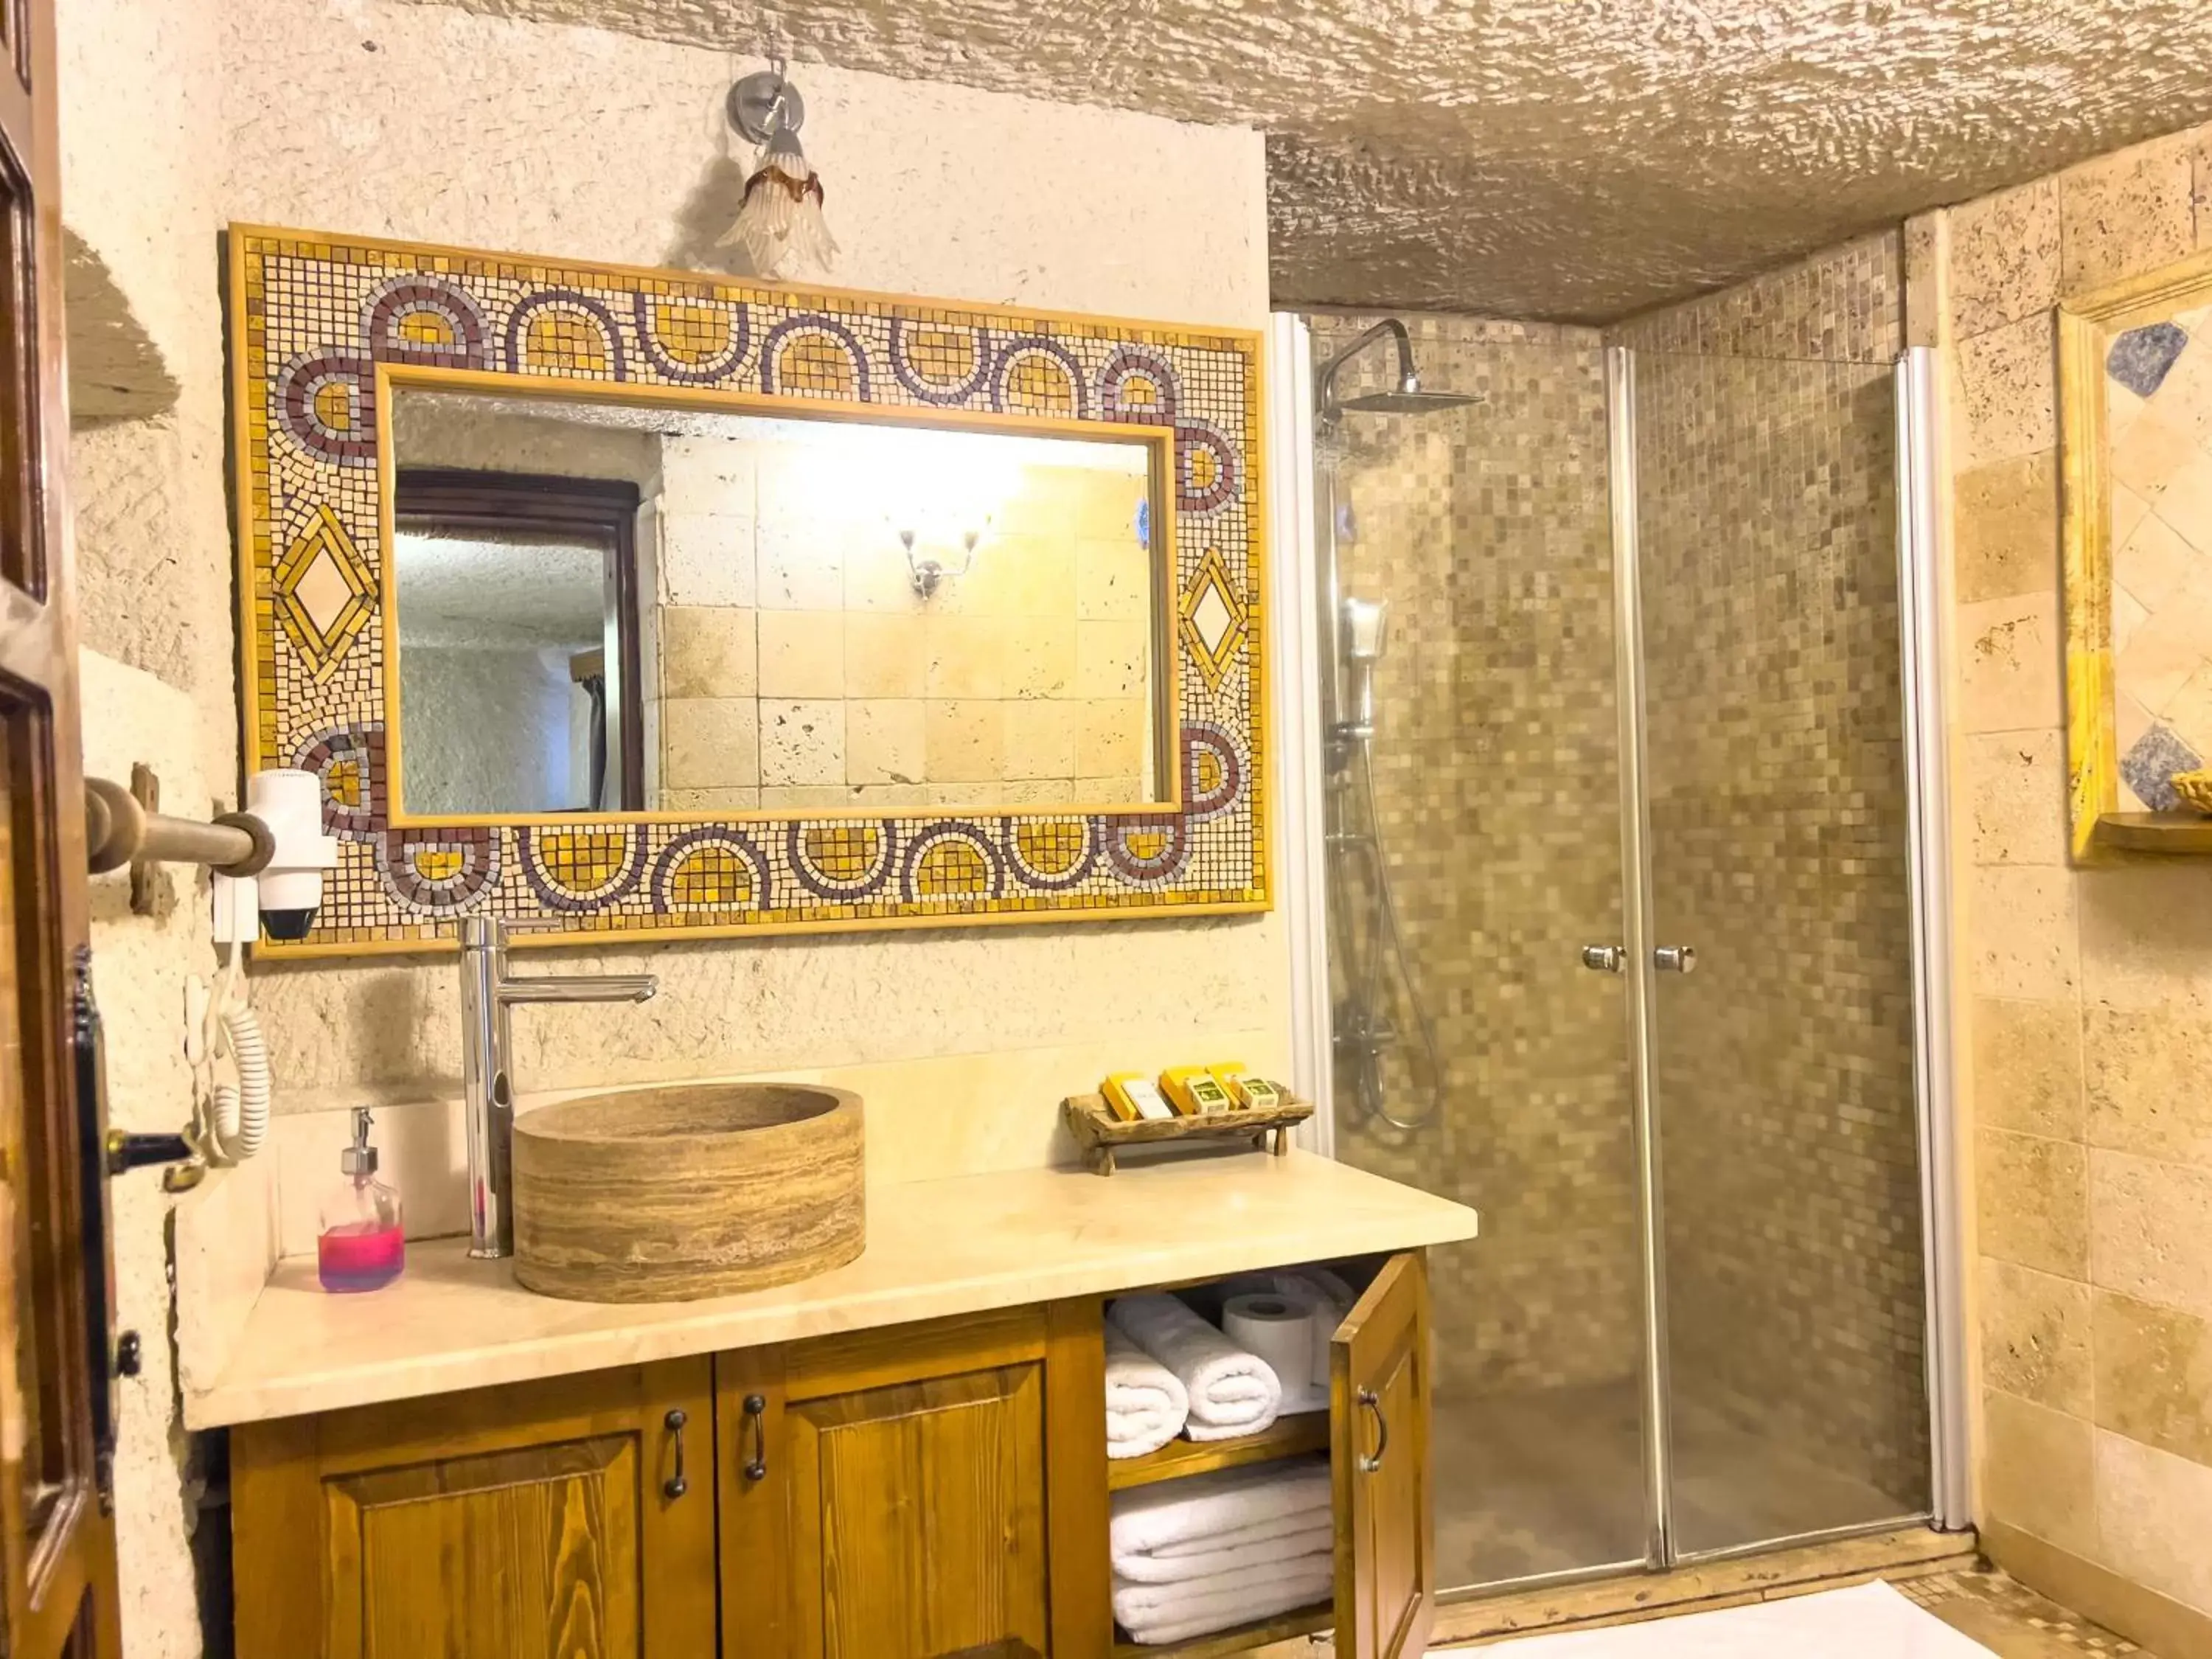 Bathroom in Local Cave House Hotel